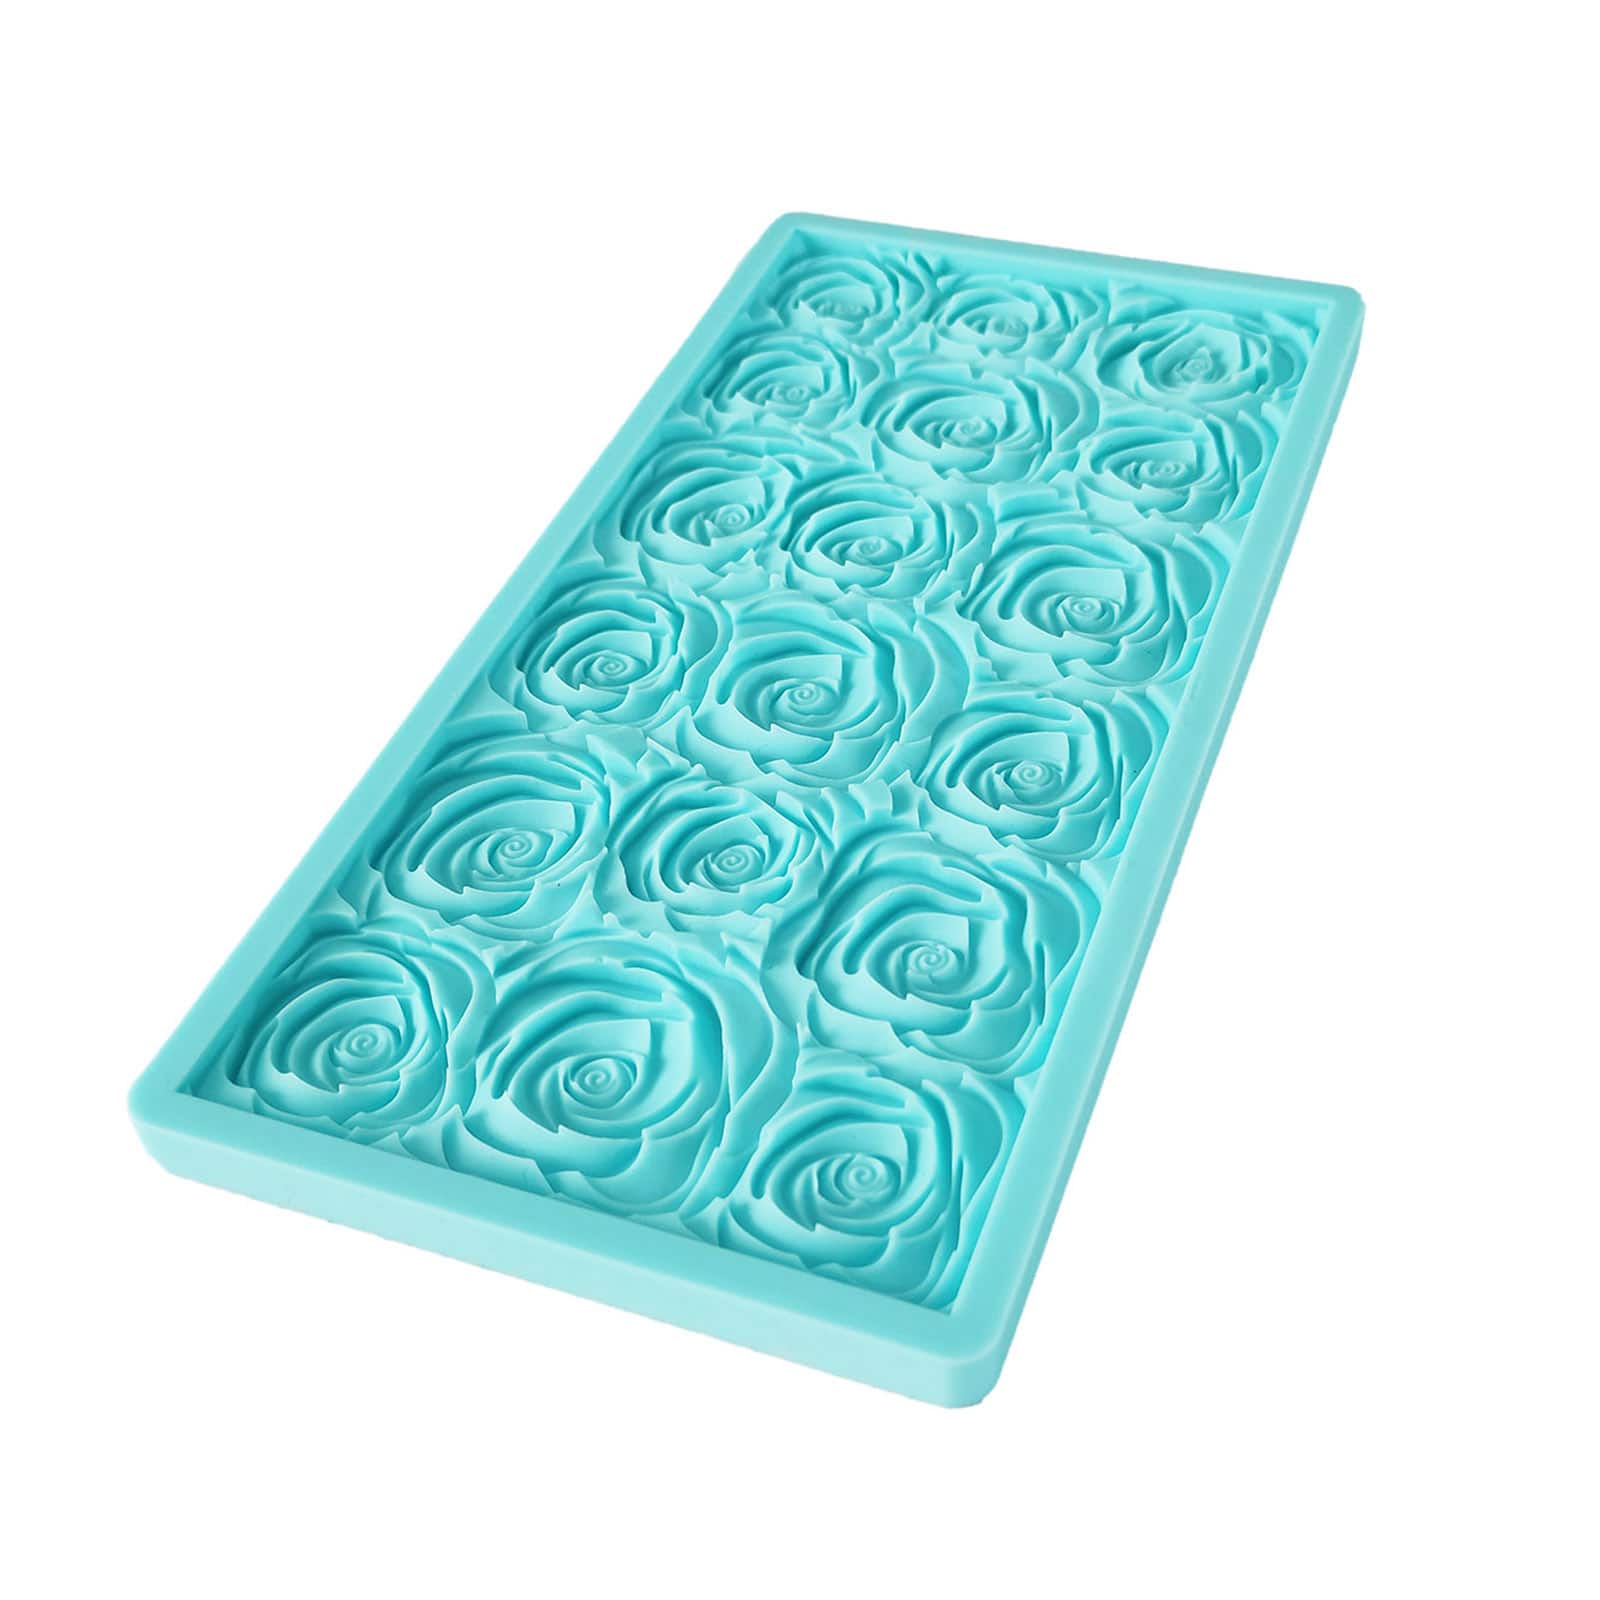 6 Pack: Rosette Pattern Silicone Fondant Mold by Celebrate It&#xAE;